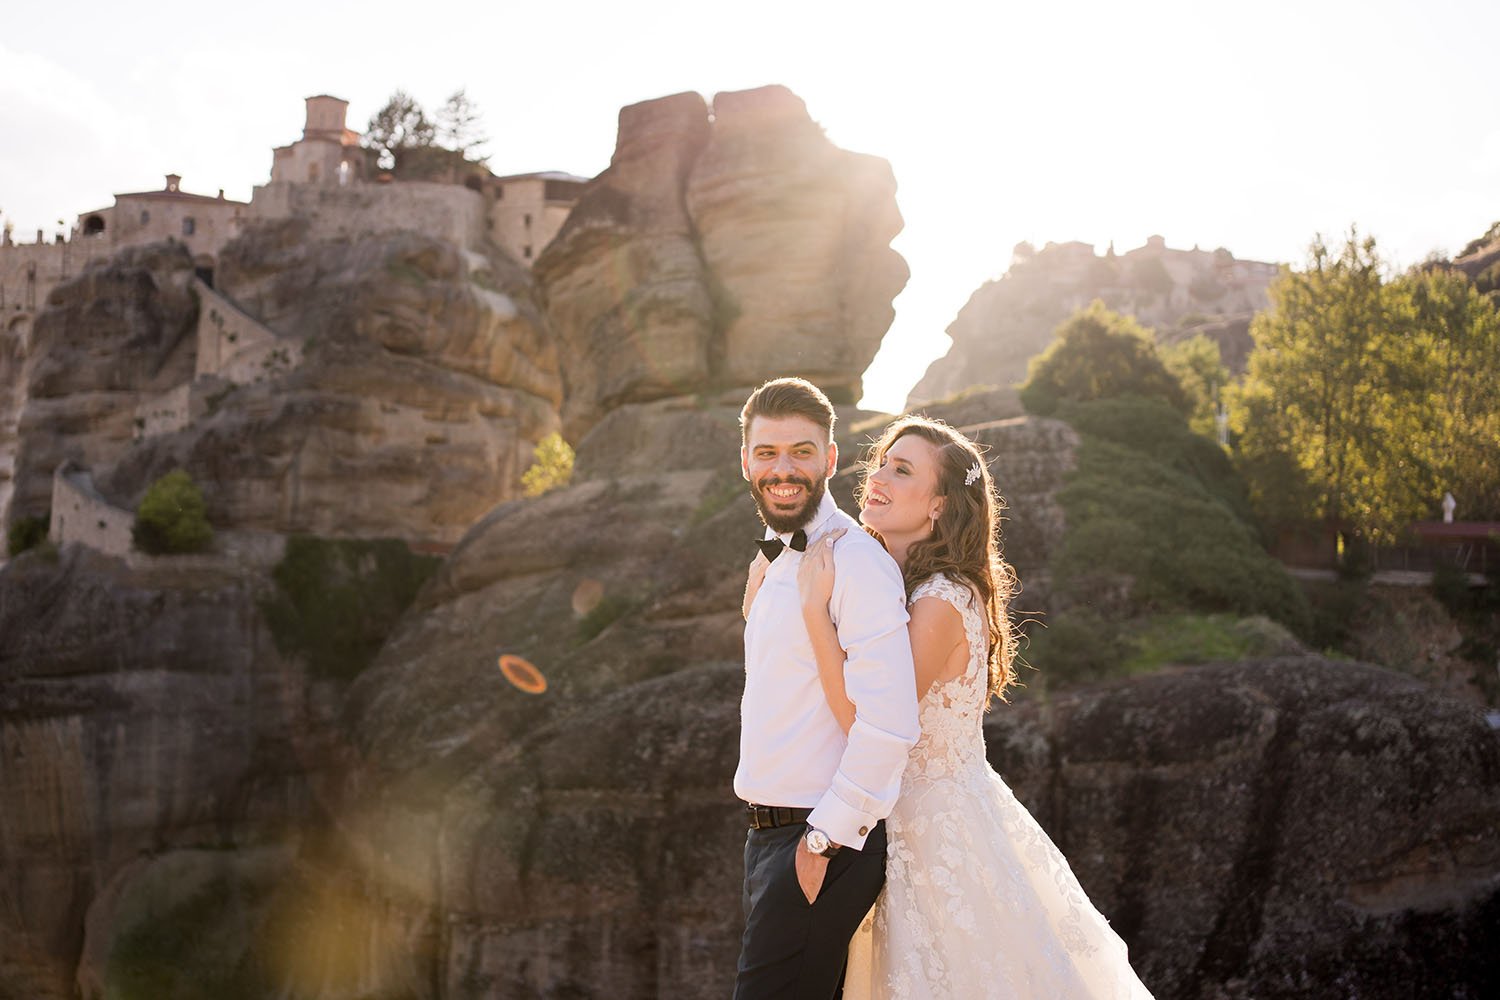  The wedding photo of the bride and groom in Meteora, Greece captured a moment of pure beauty and love. The bride looked breathtaking in her flowing wedding gown, with delicate lace and intricate beading that shone in the sunlight. Her hair was style